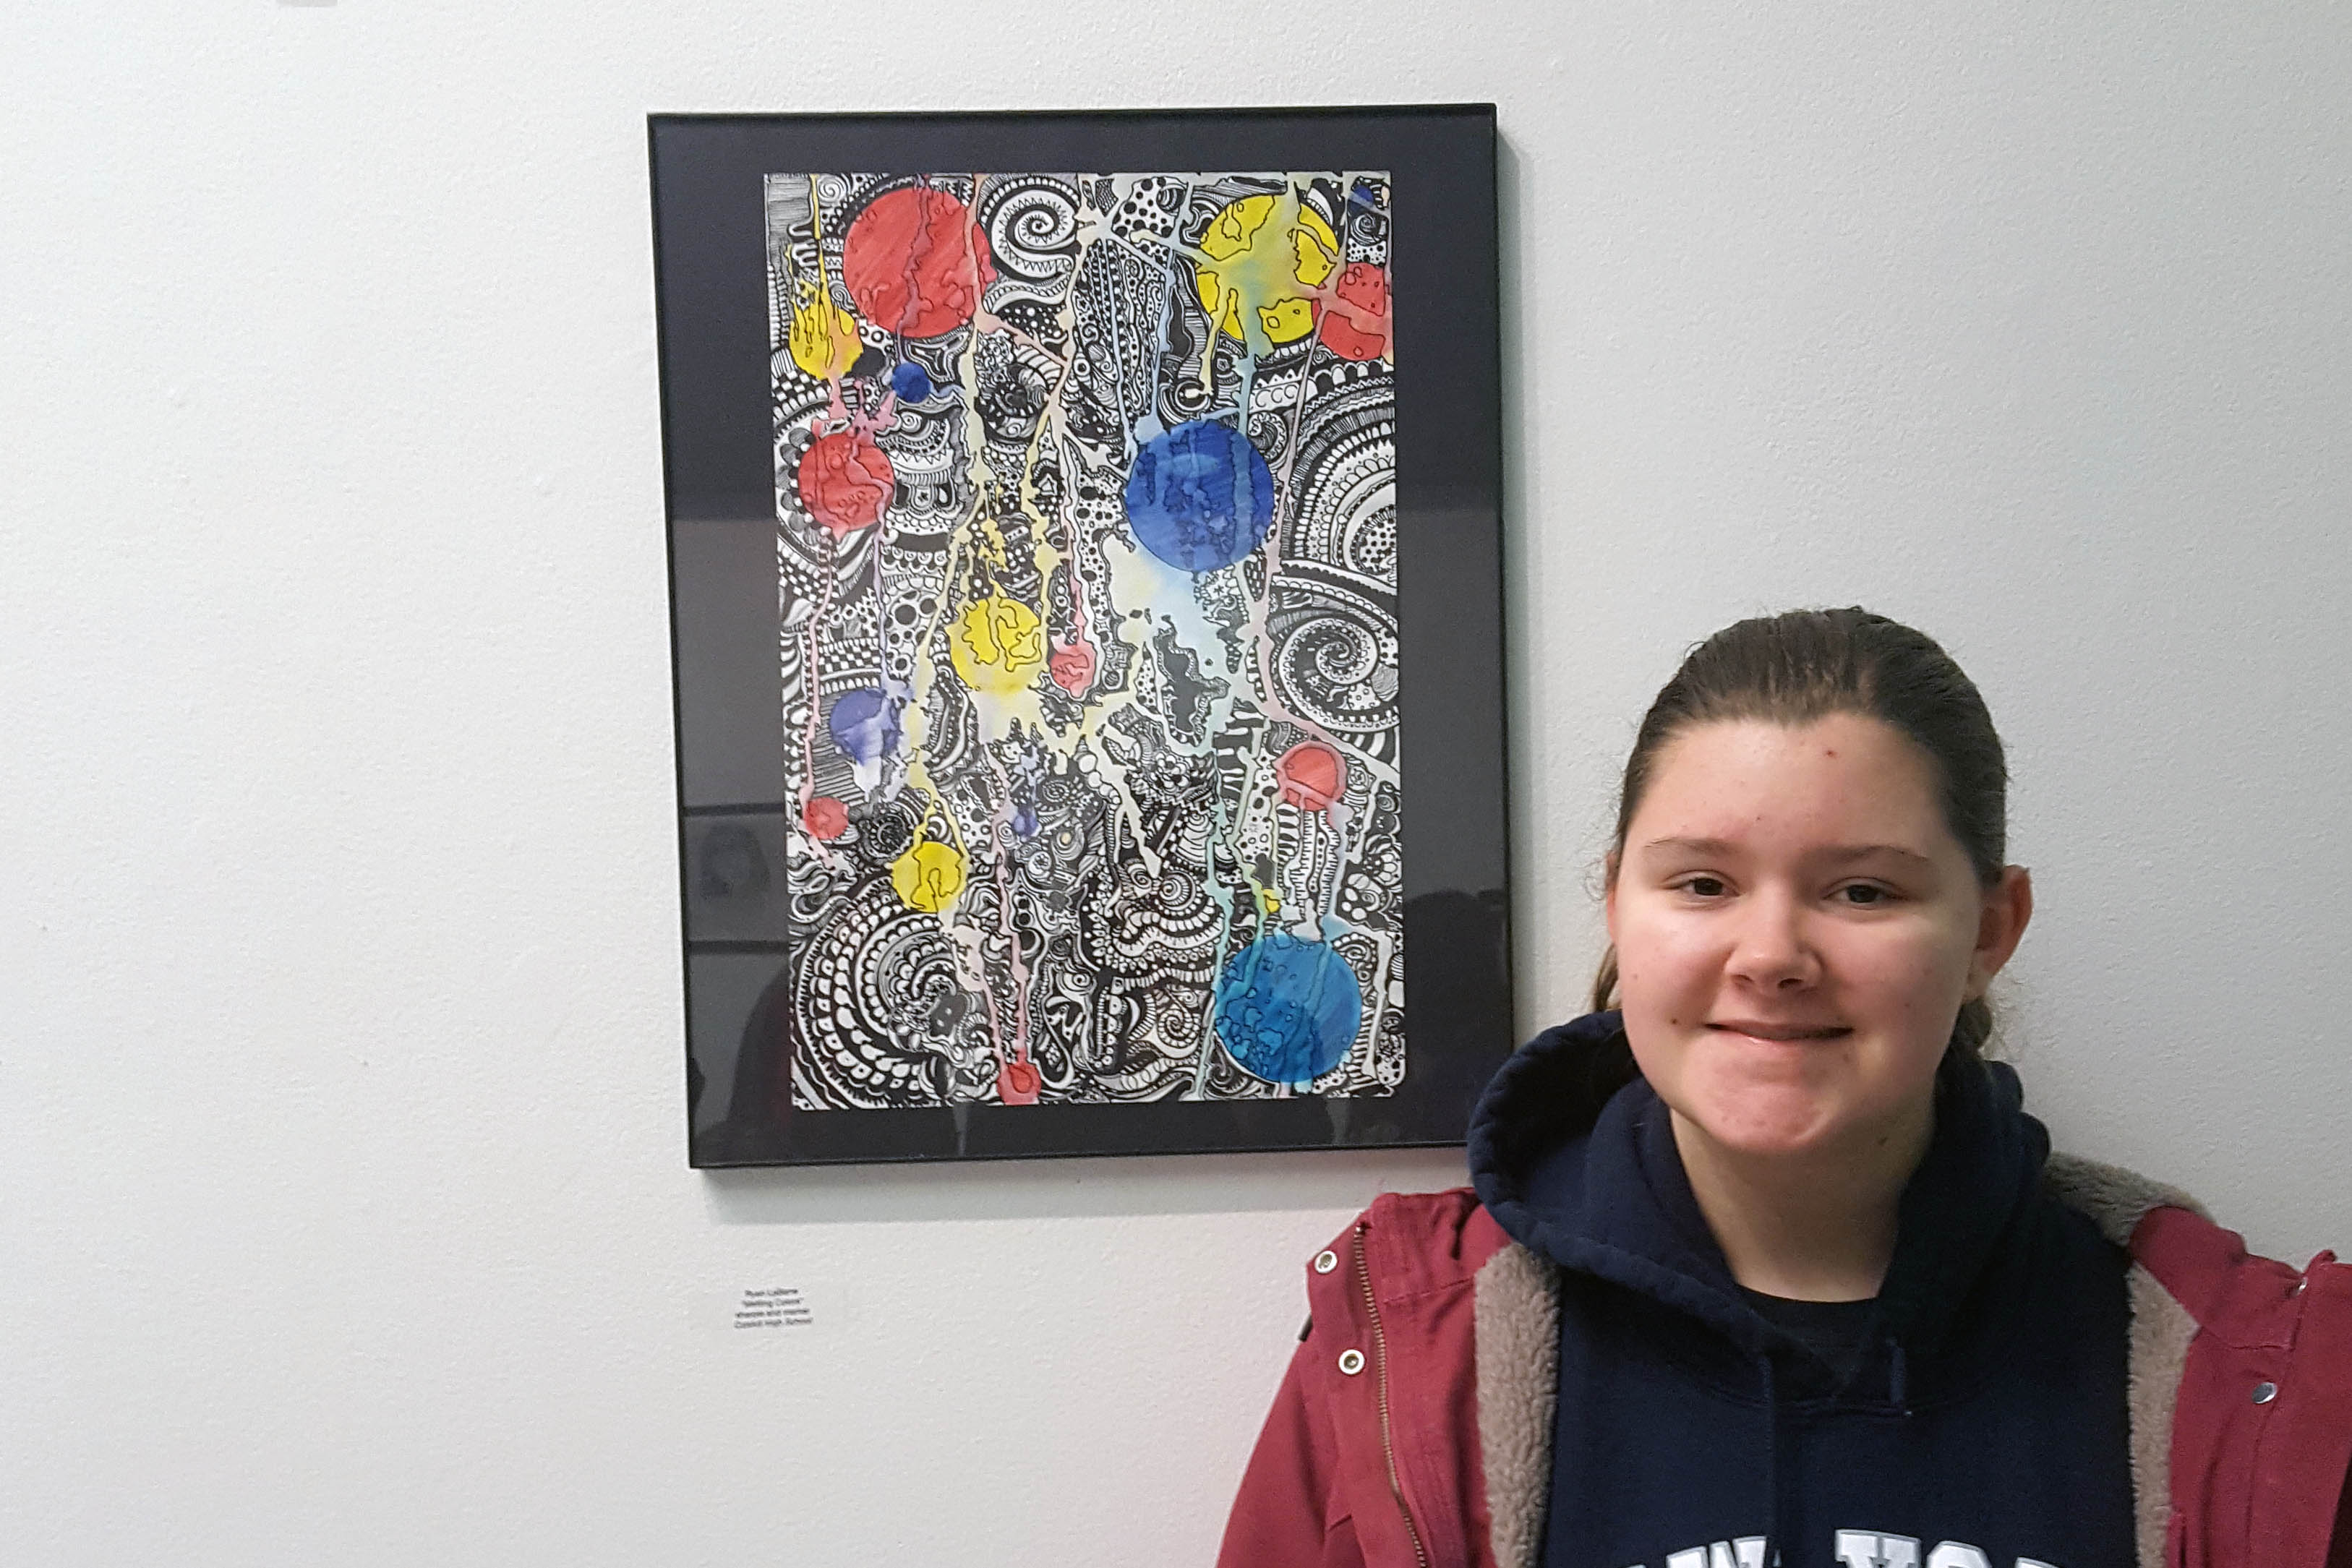 Ryan LaBarre poses with her painting